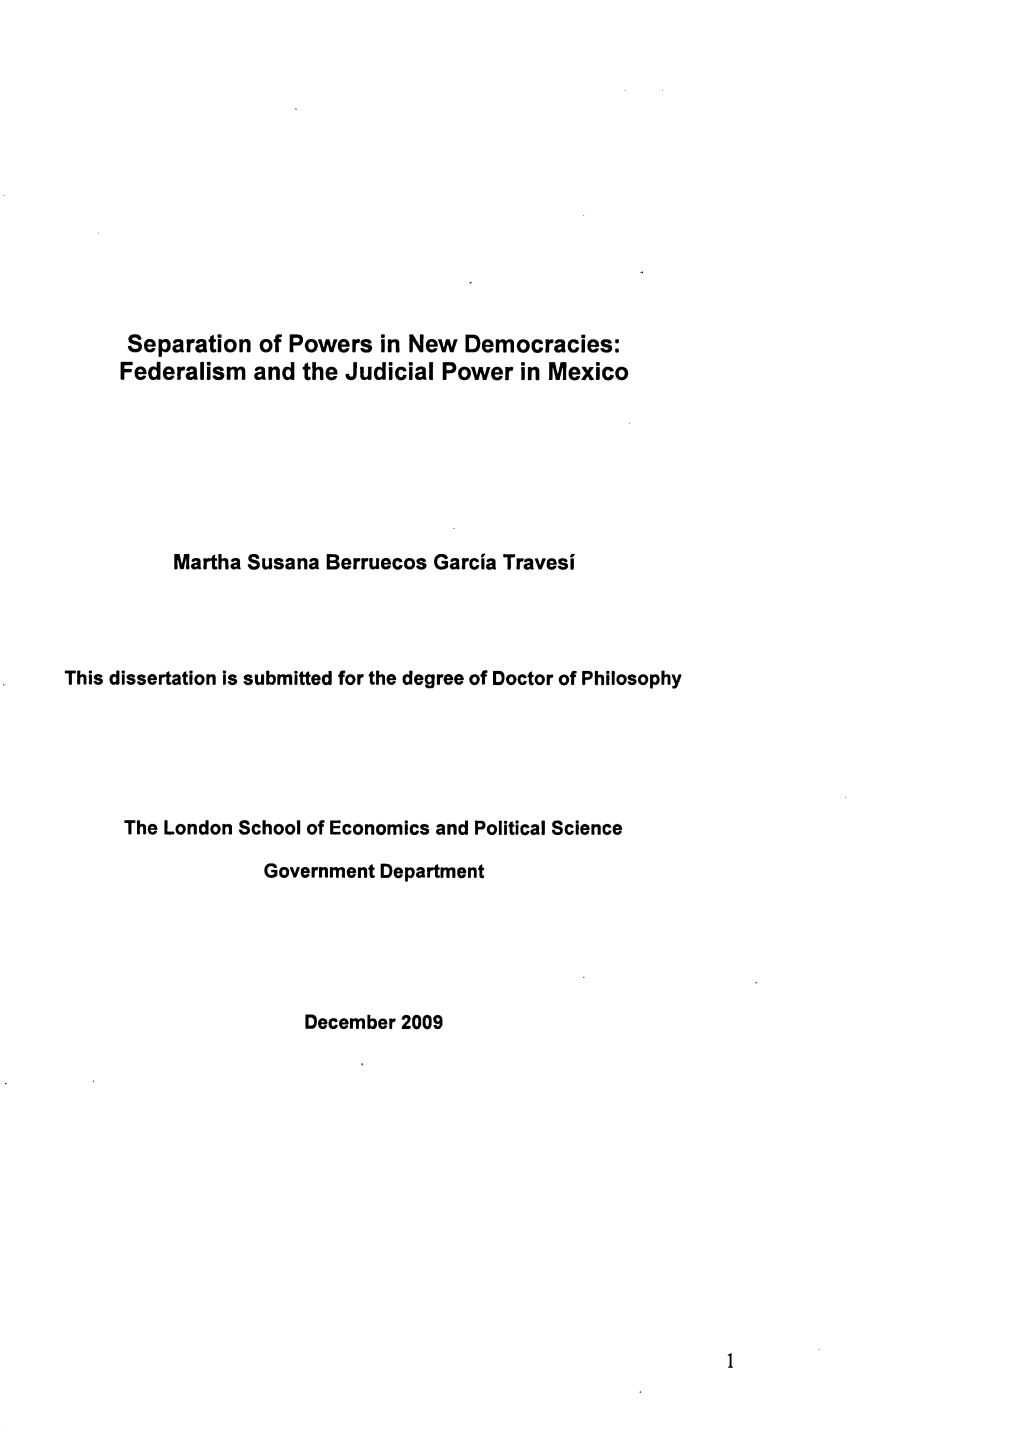 Federalism and the Judicial Power in Mexico